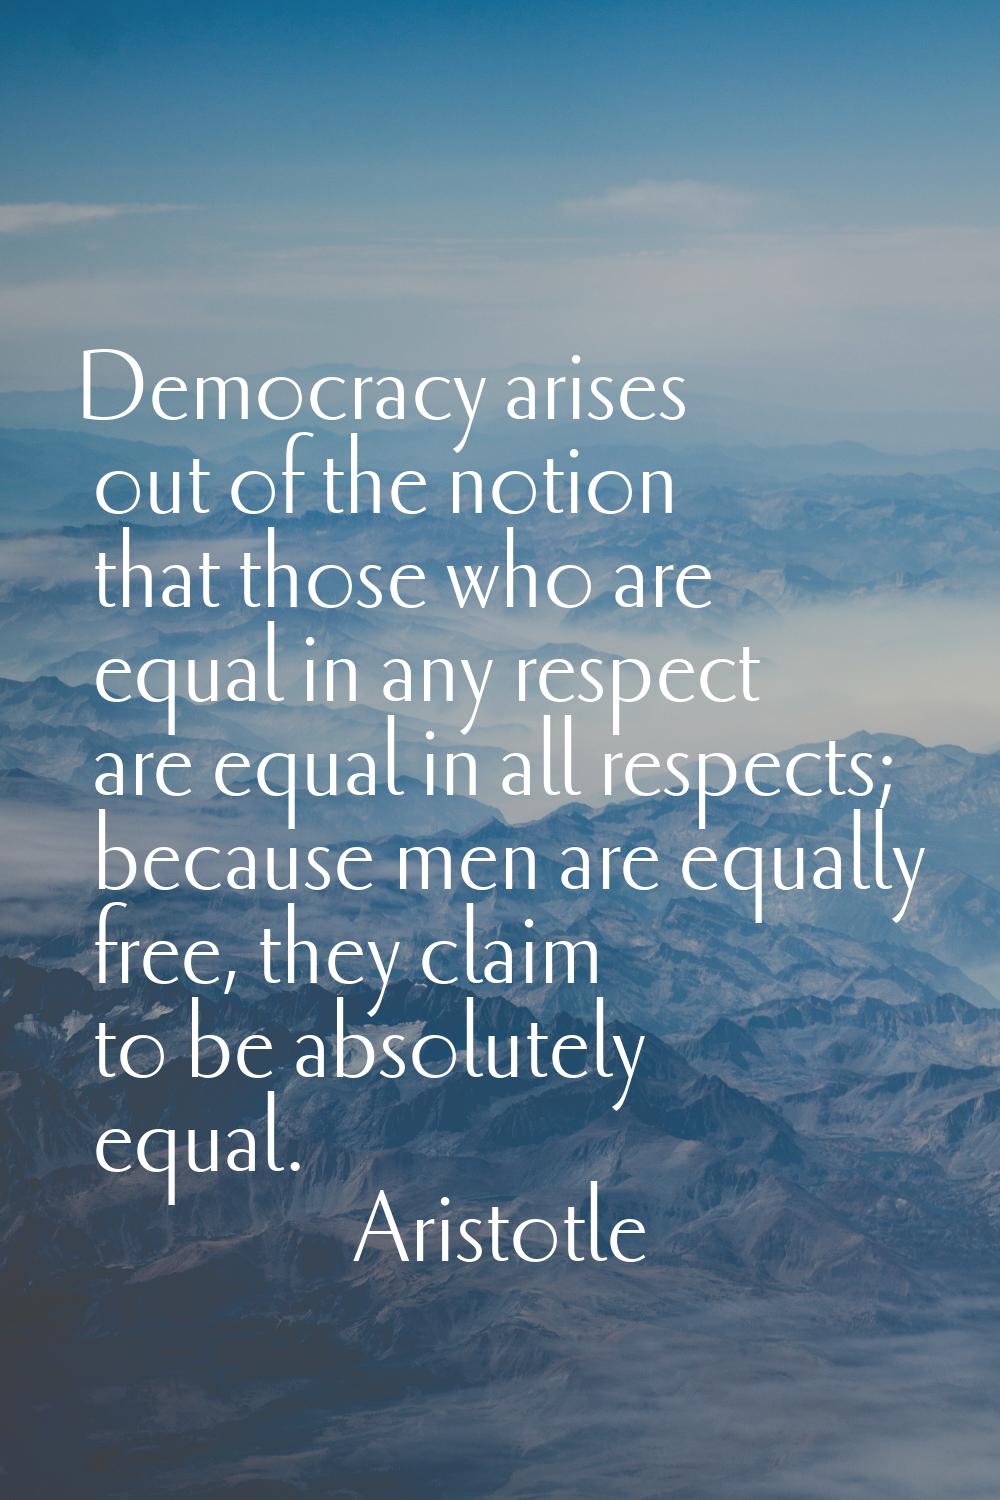 Democracy arises out of the notion that those who are equal in any respect are equal in all respect